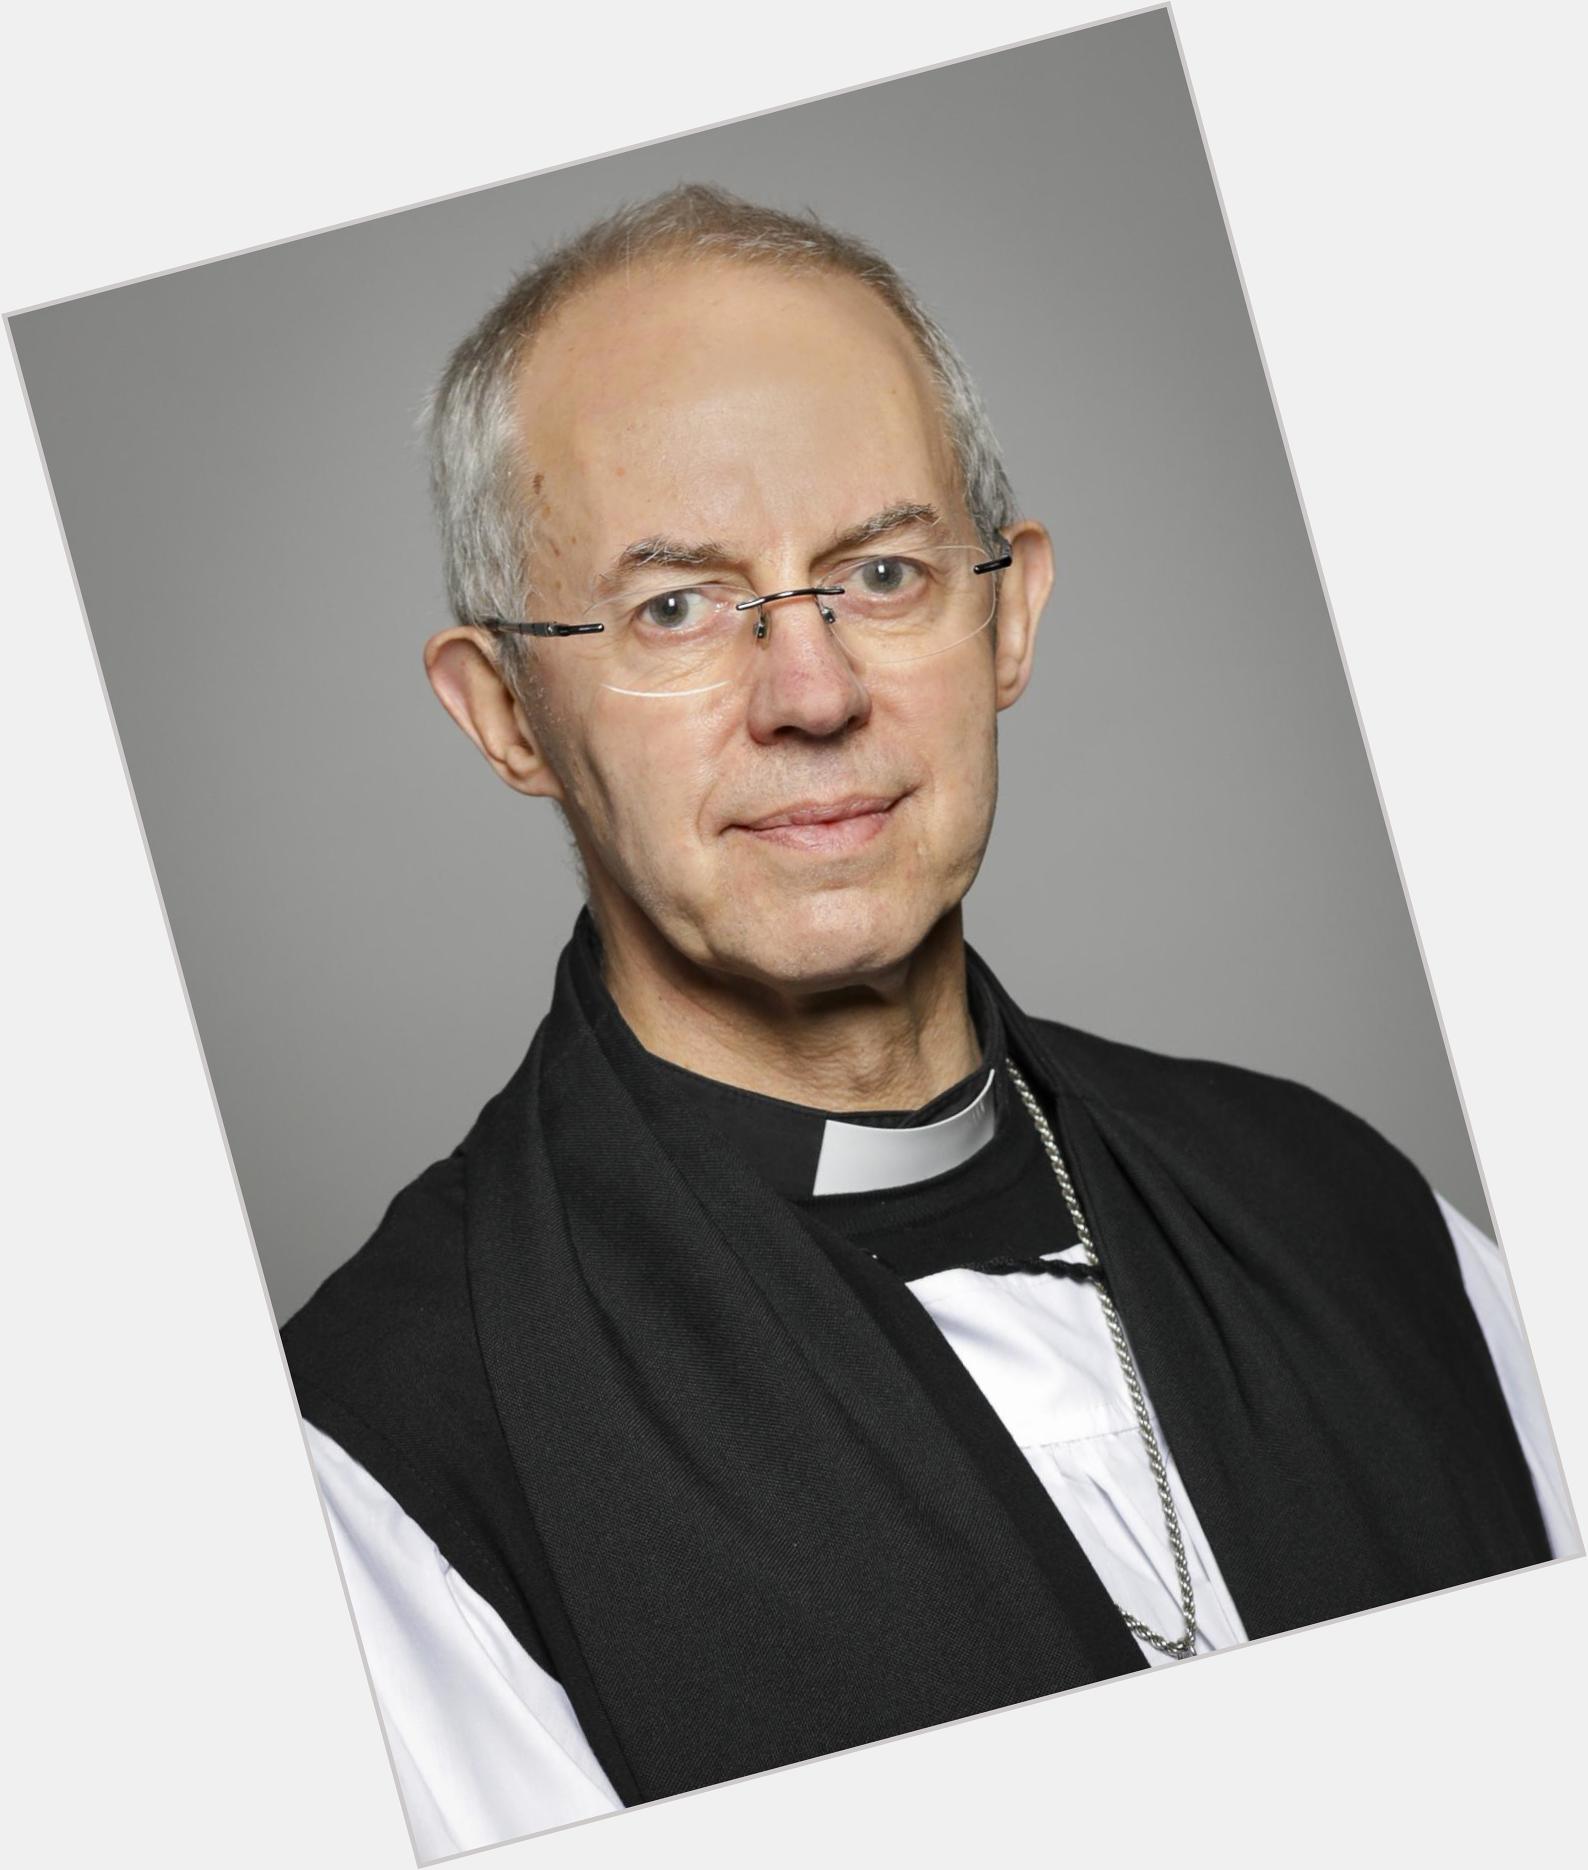 Justin Welby dating 2